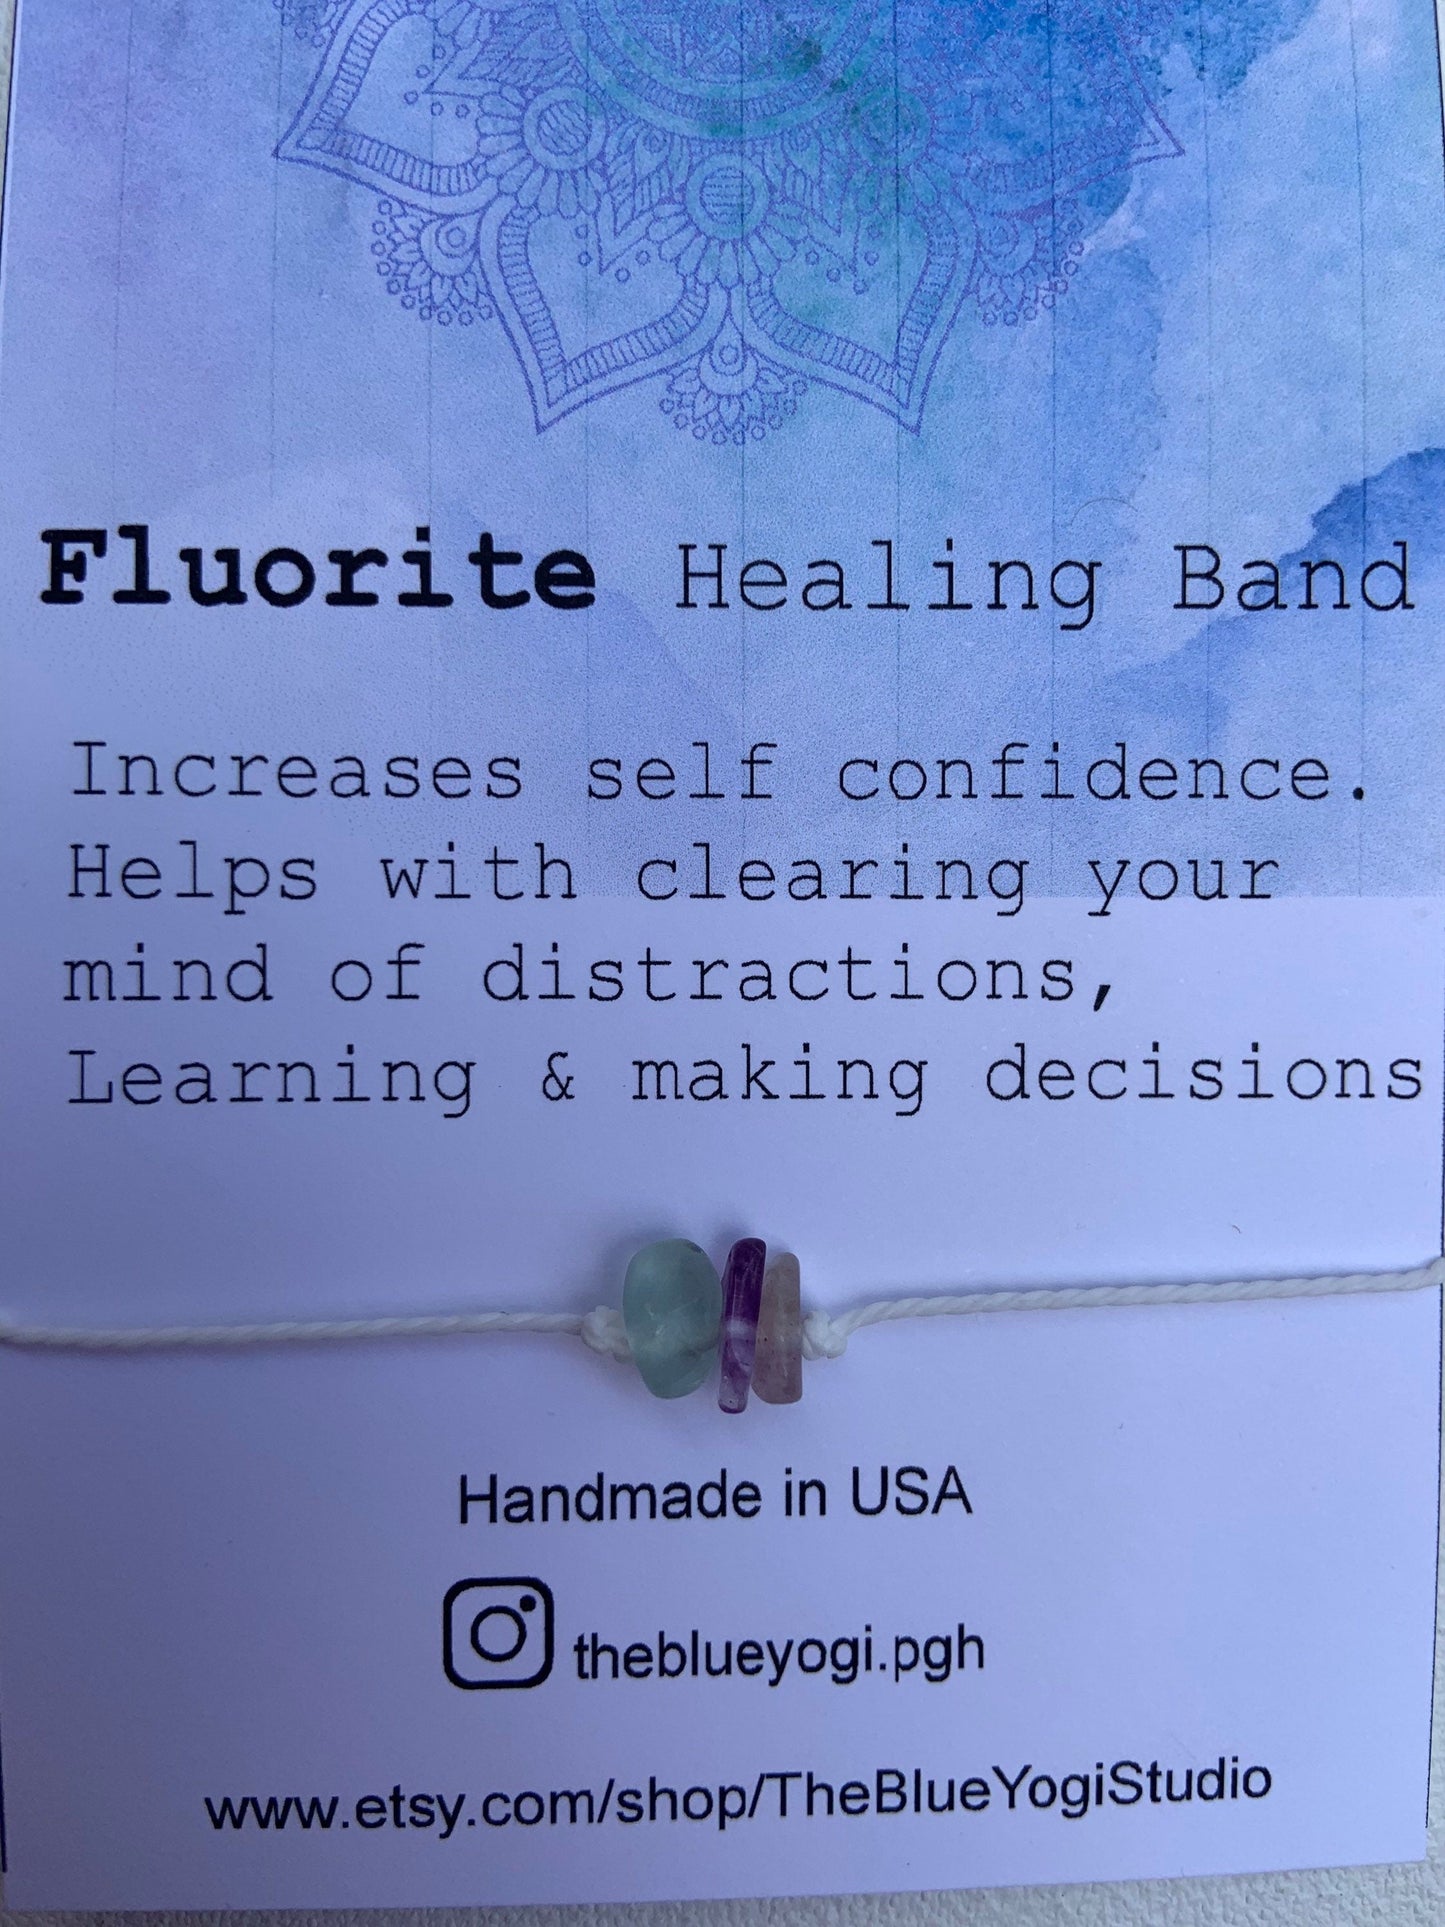 Fluorite Healing Band with an Affirmation